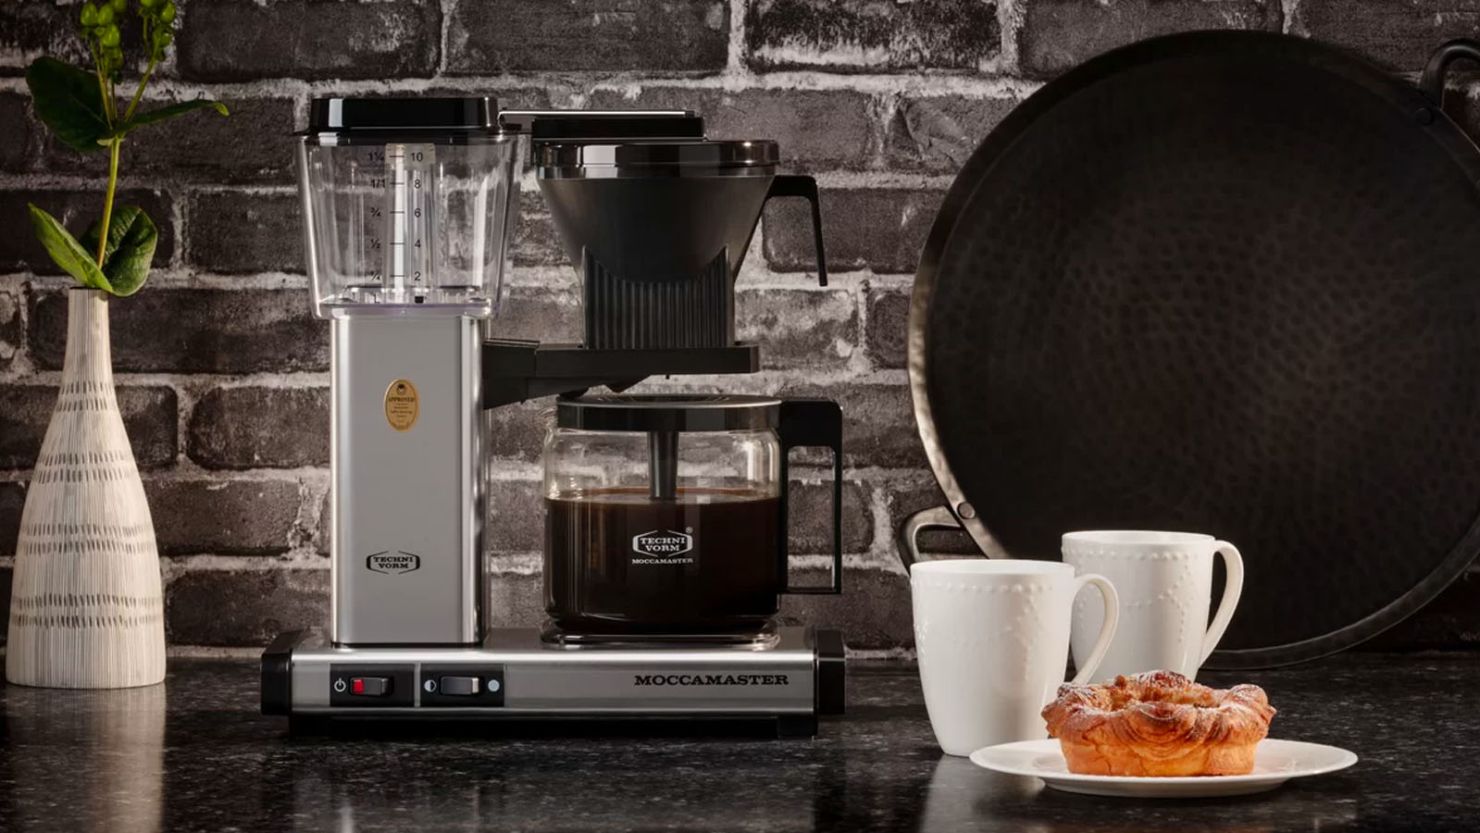 Is this the world's most expensive coffee maker? - News + Articles 